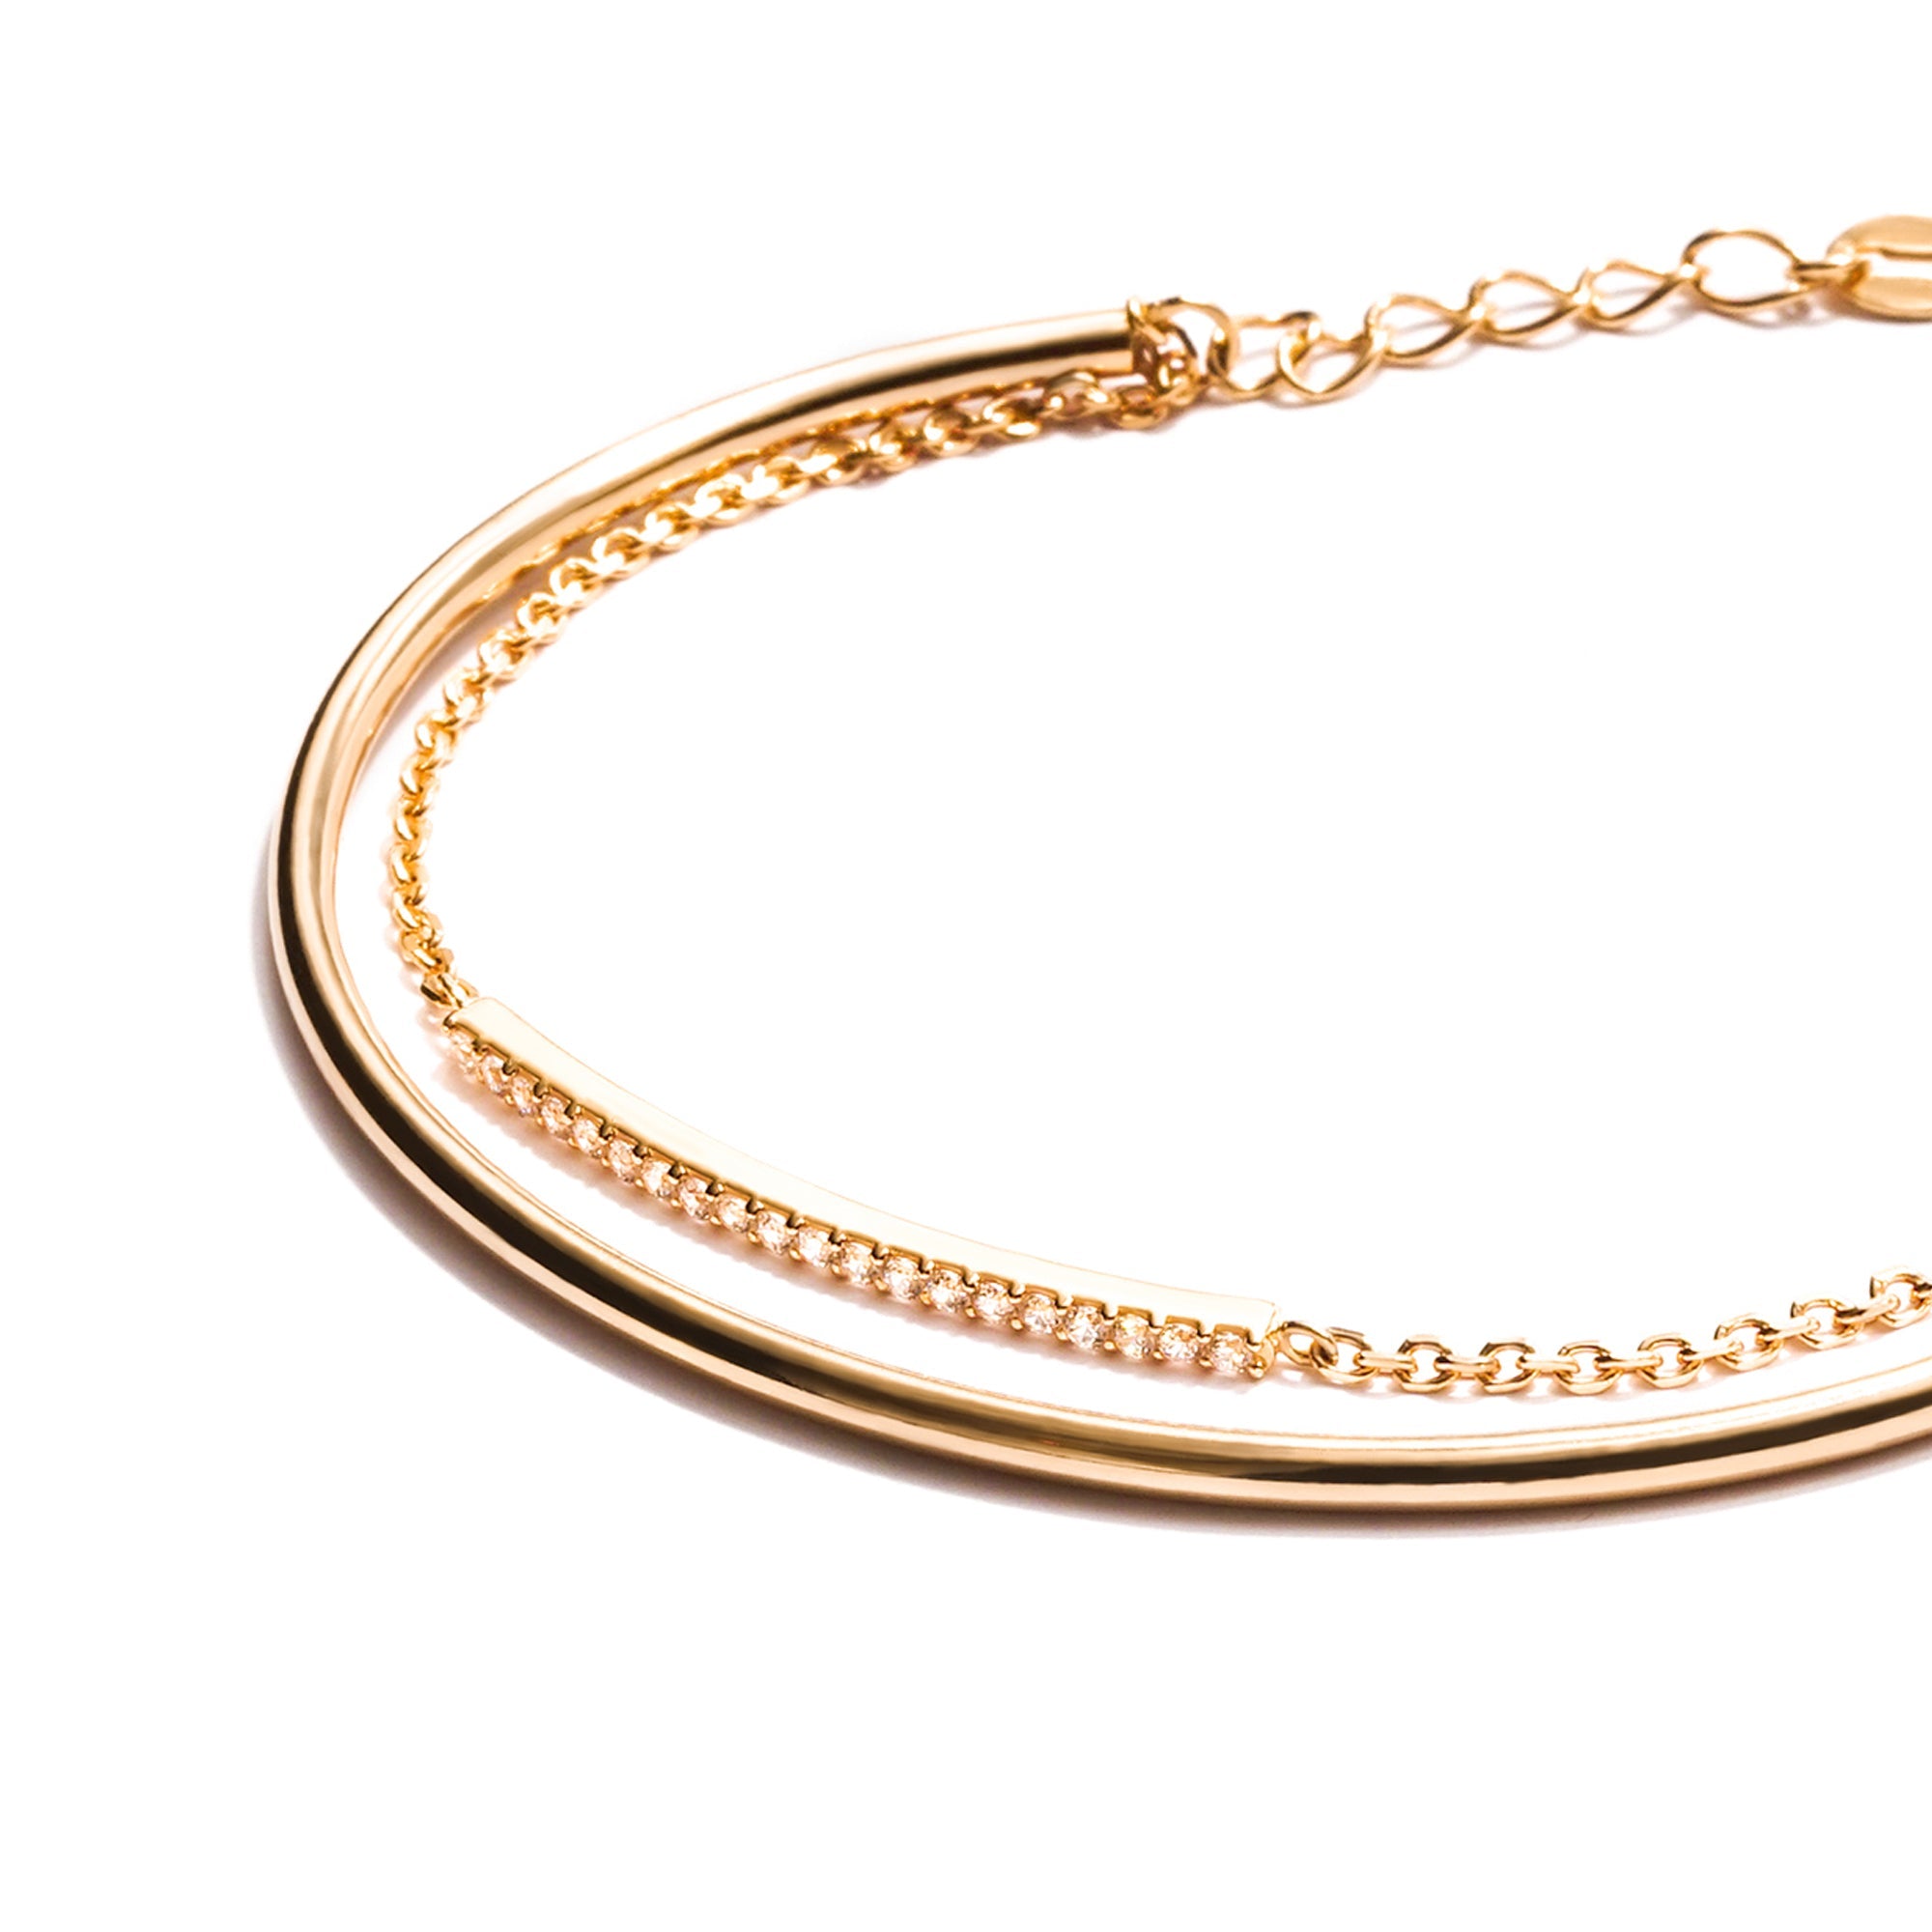 Tarly Gold Bracelet - Twine Collection - Juene Jewelry